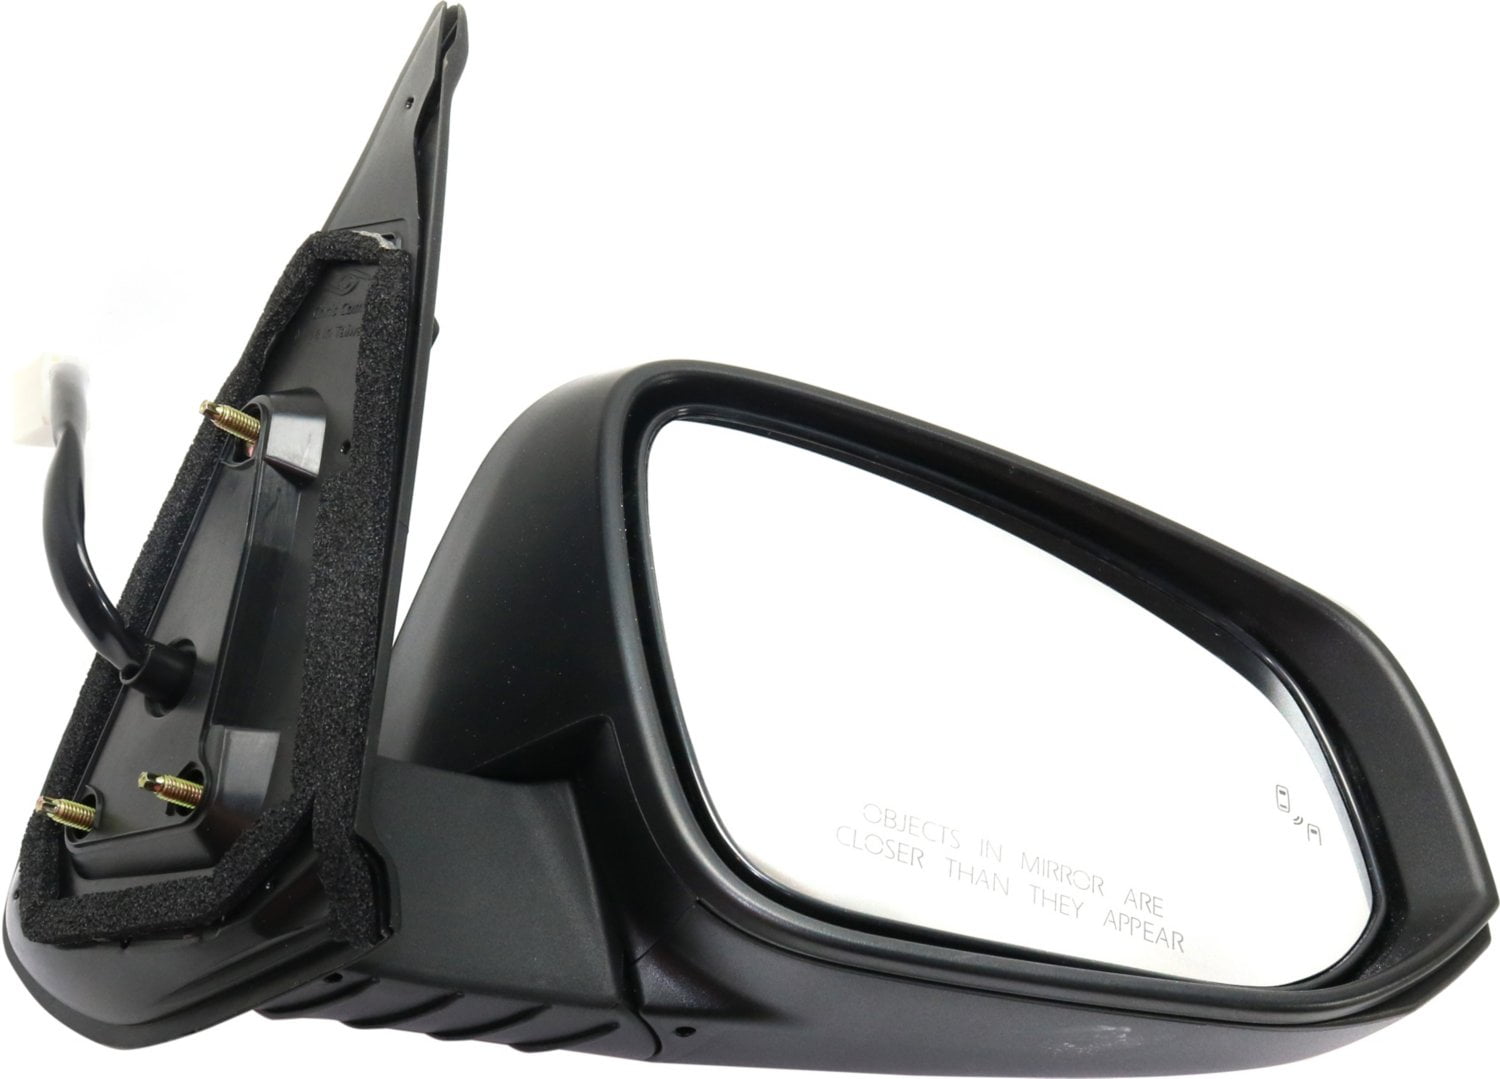 DNA Motoring OEM-MR-TO1321339 Passenger Right Side Rear View Mirror Powered Adjustment w/Heated & Spotter Glass Compatible with 2015-2018 Sienna